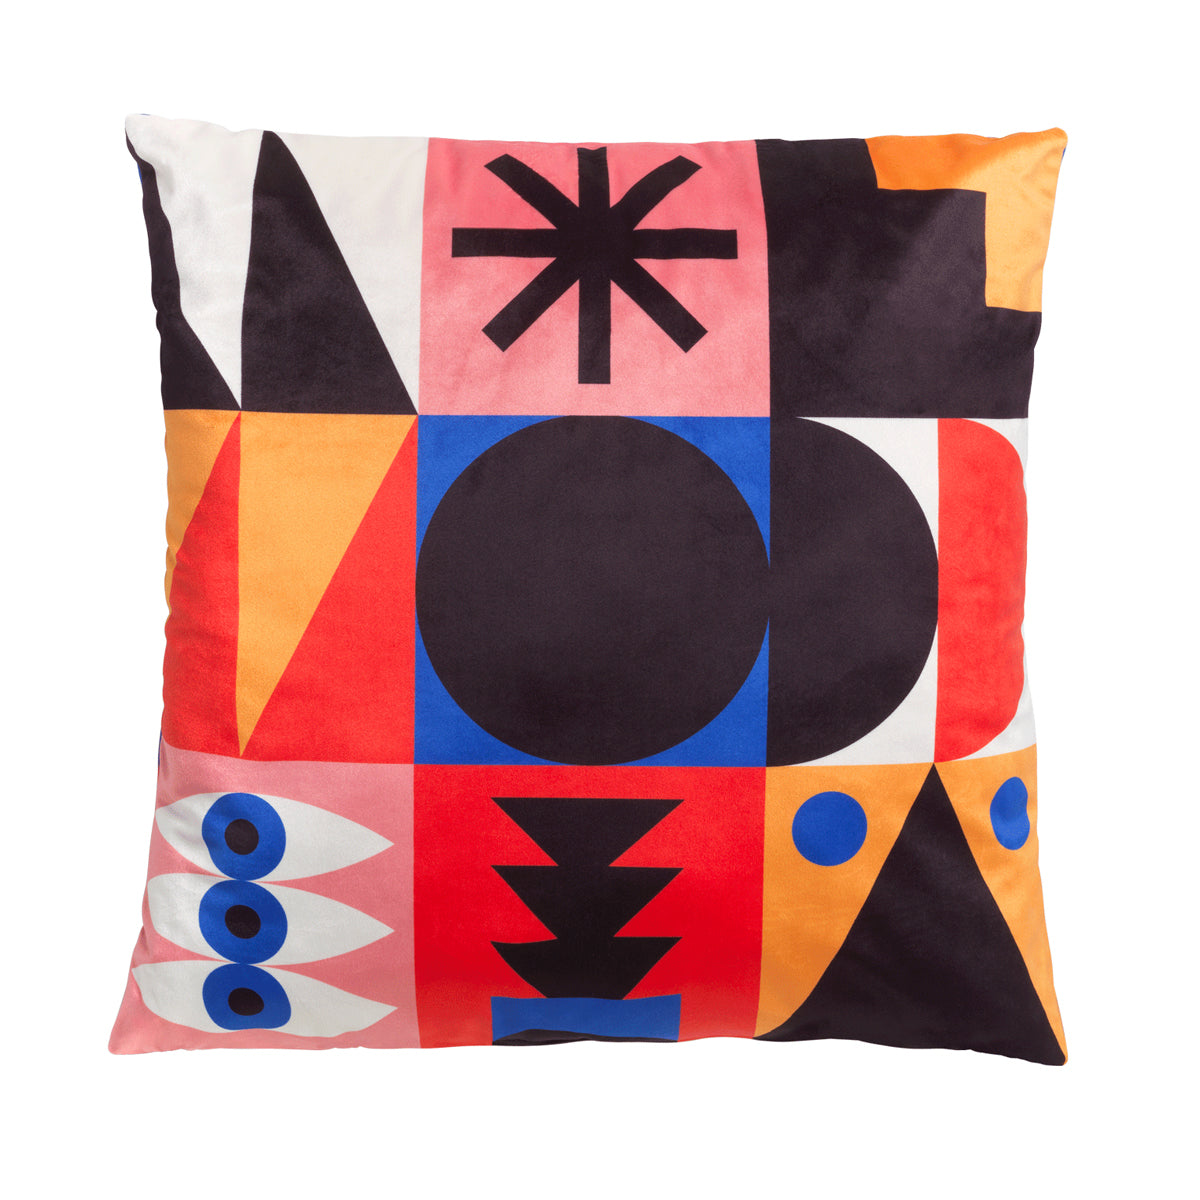 Oggian Red Palm Cushion Cover by Marco Oggian